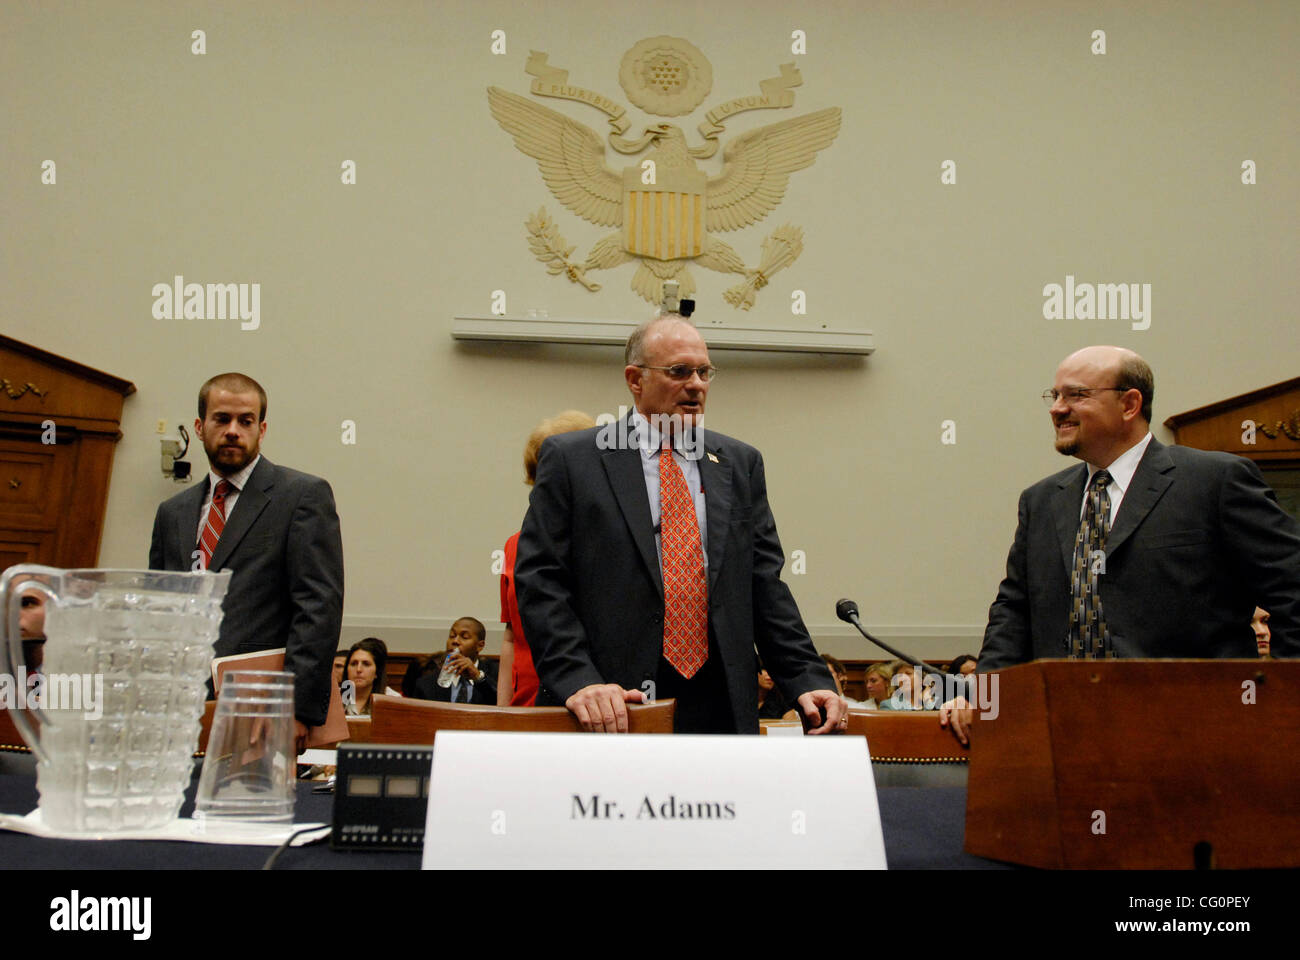 ROBERT ADAMS, Pardon Attorney for the Justice Department, prepares to testify before the House Judiciary committee during a hearing on the 'Use and Misuse of Presidential Clemency Power for Executive Branch Officials.' The hearing came about after President George Bush commuted former White House of Stock Photo